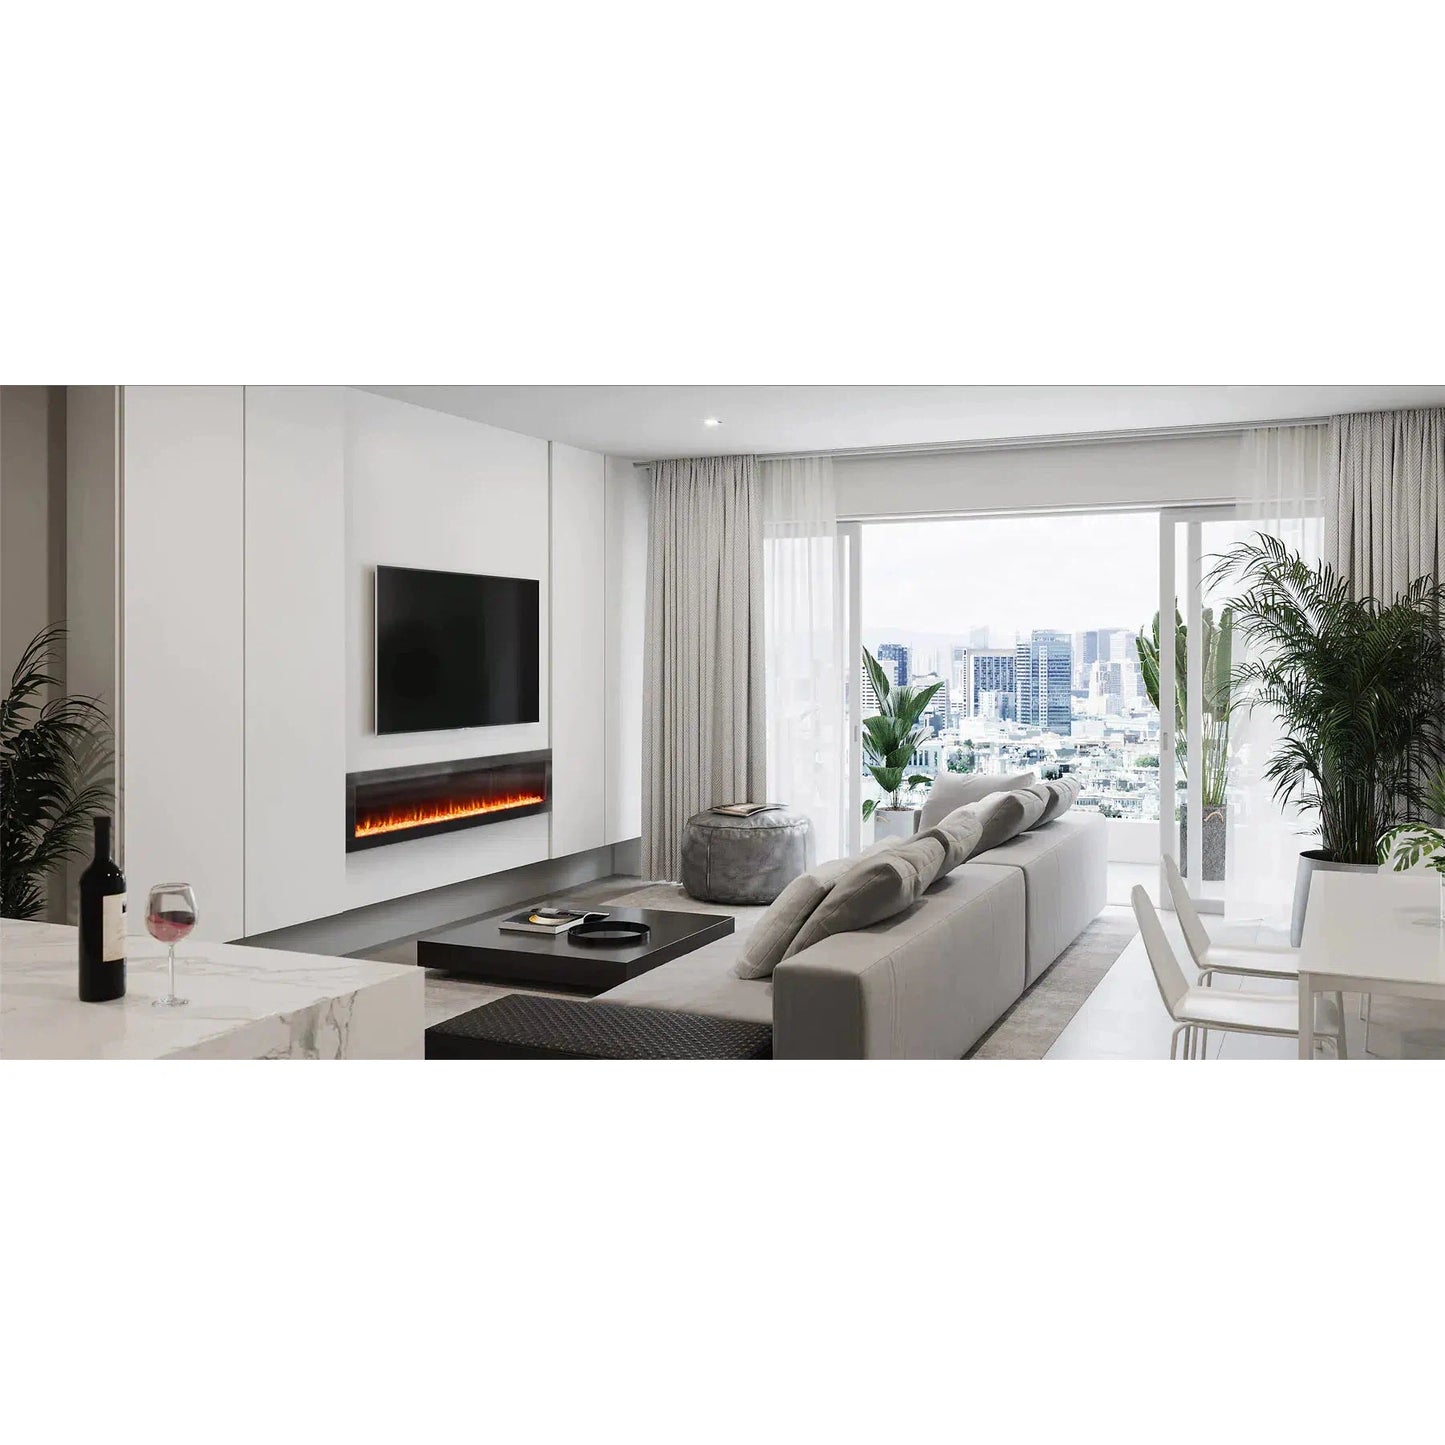 Ambe Linear72 68" Built-in Electric Fireplace